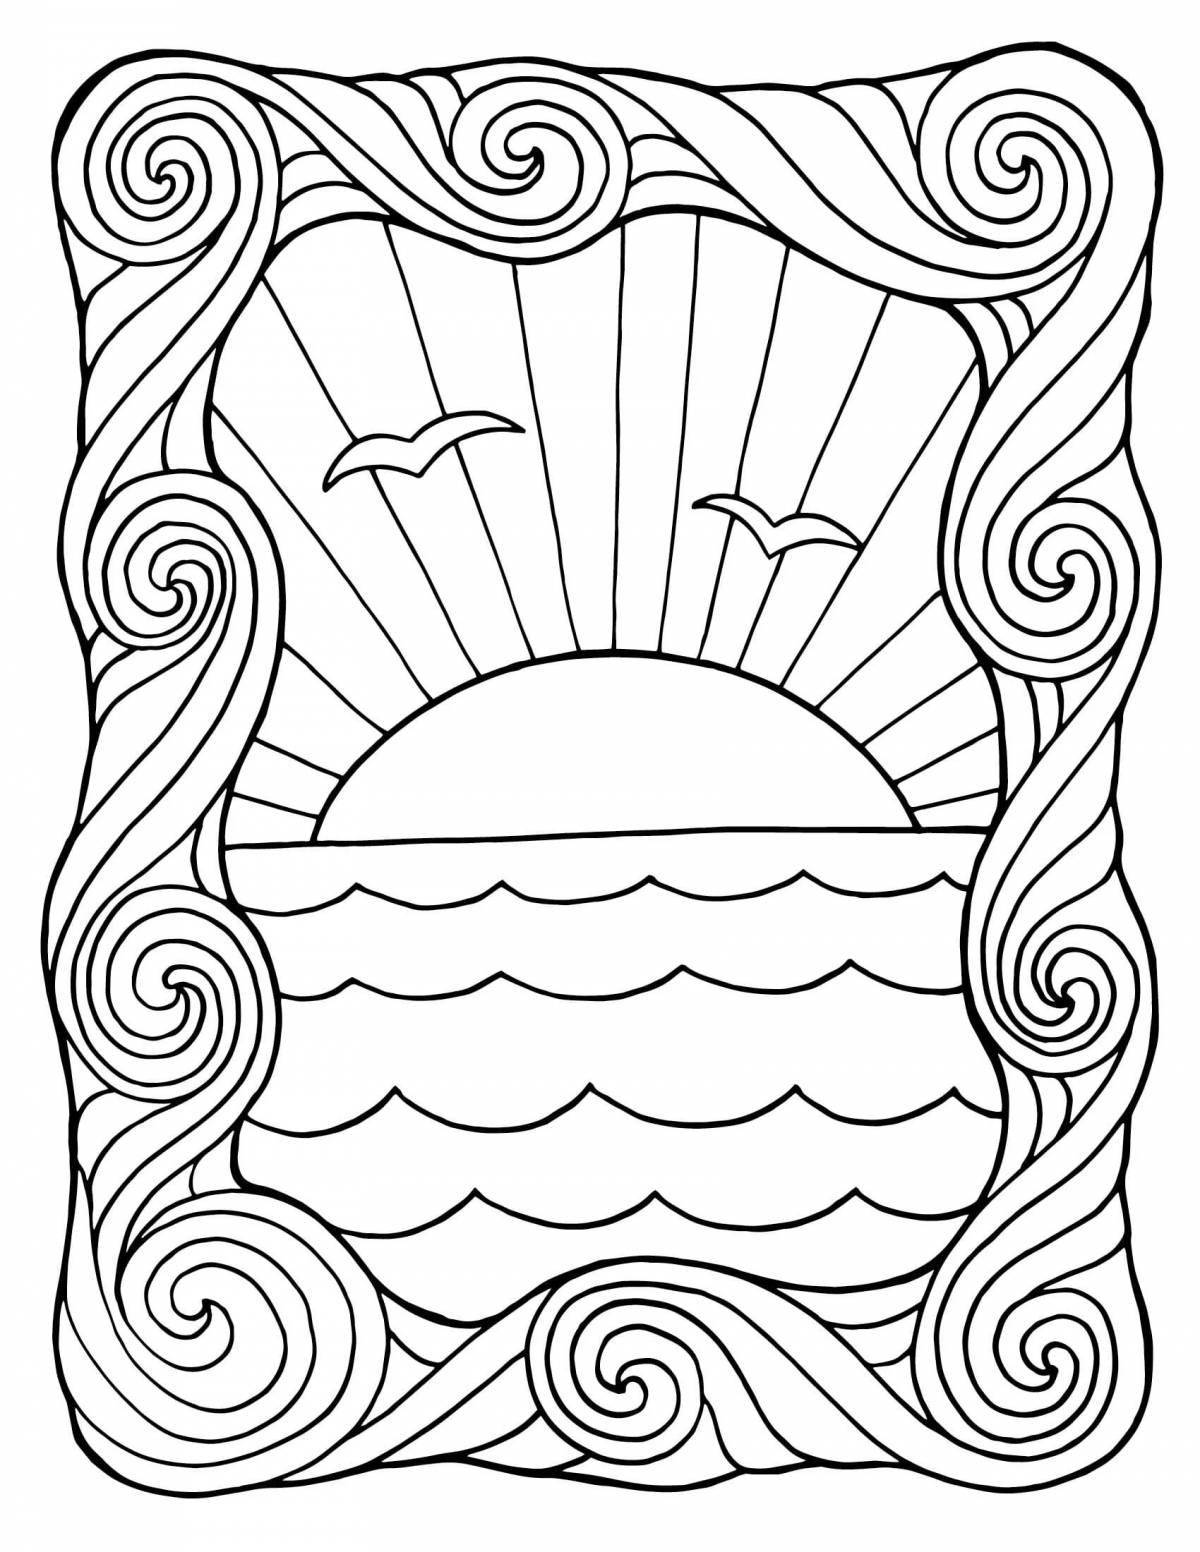 Splendid waves coloring pages for kids